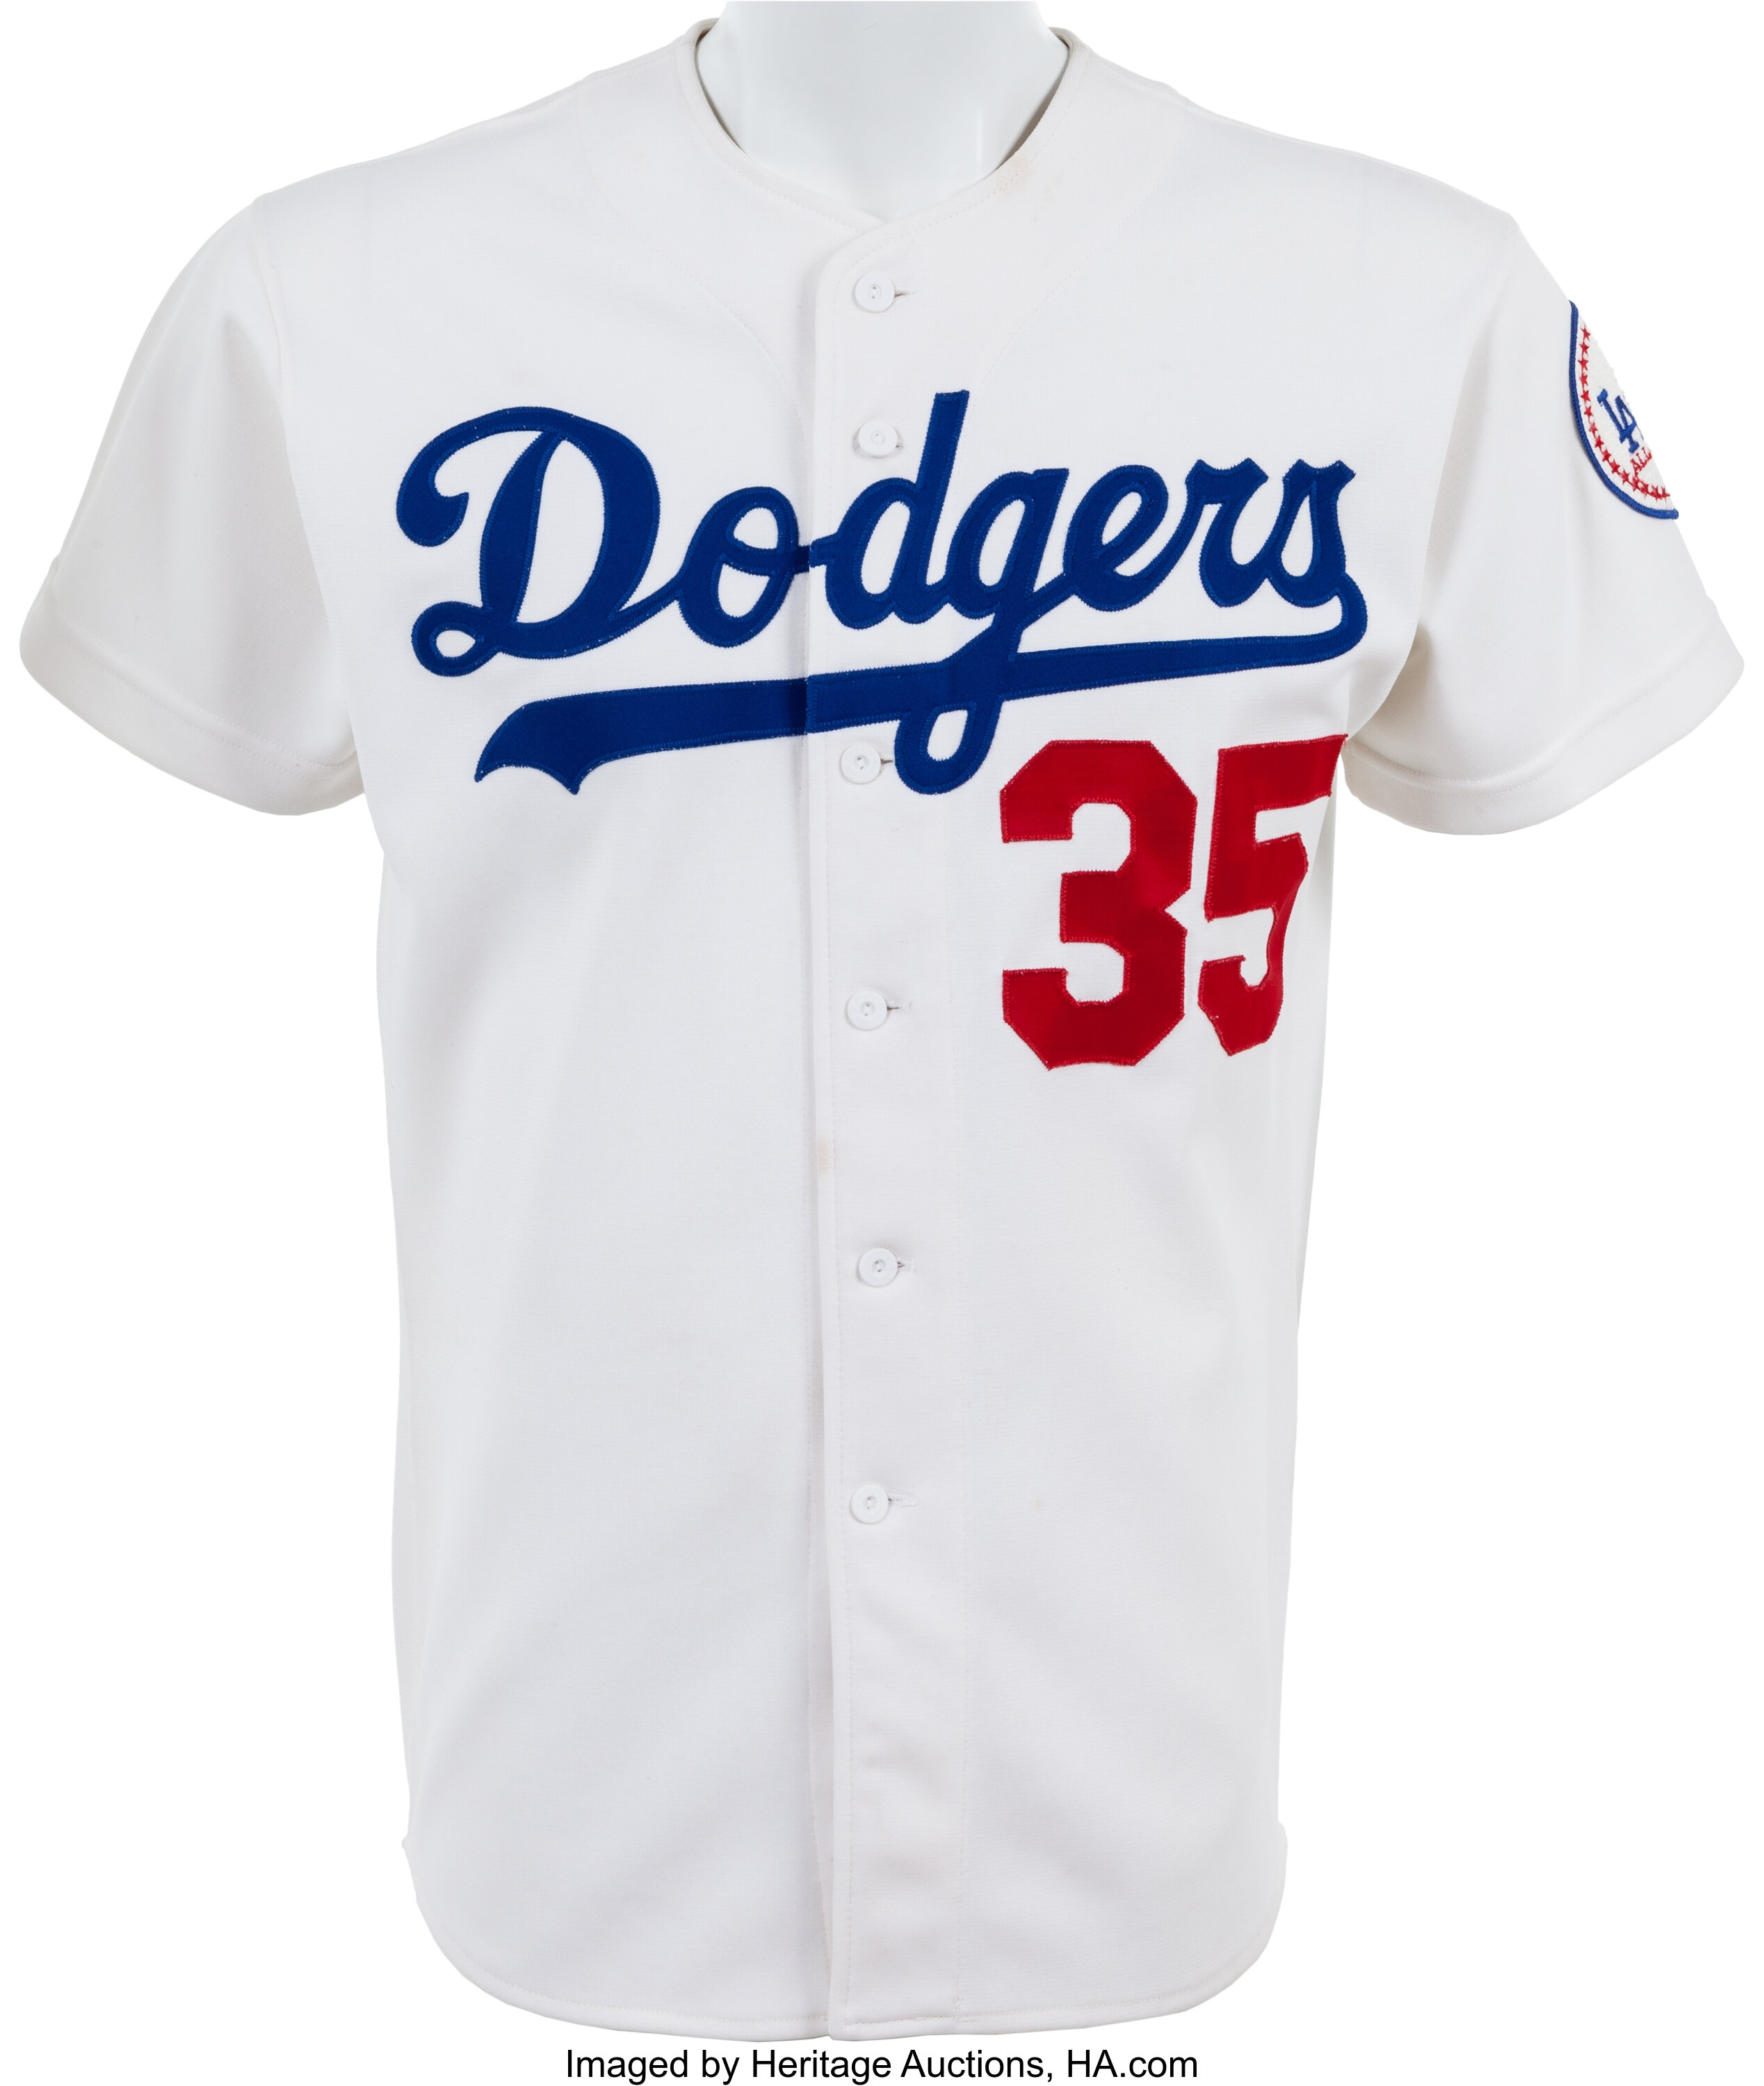 Circa 1980 Los Angeles Dodgers Game Worn Jersey Attributed to